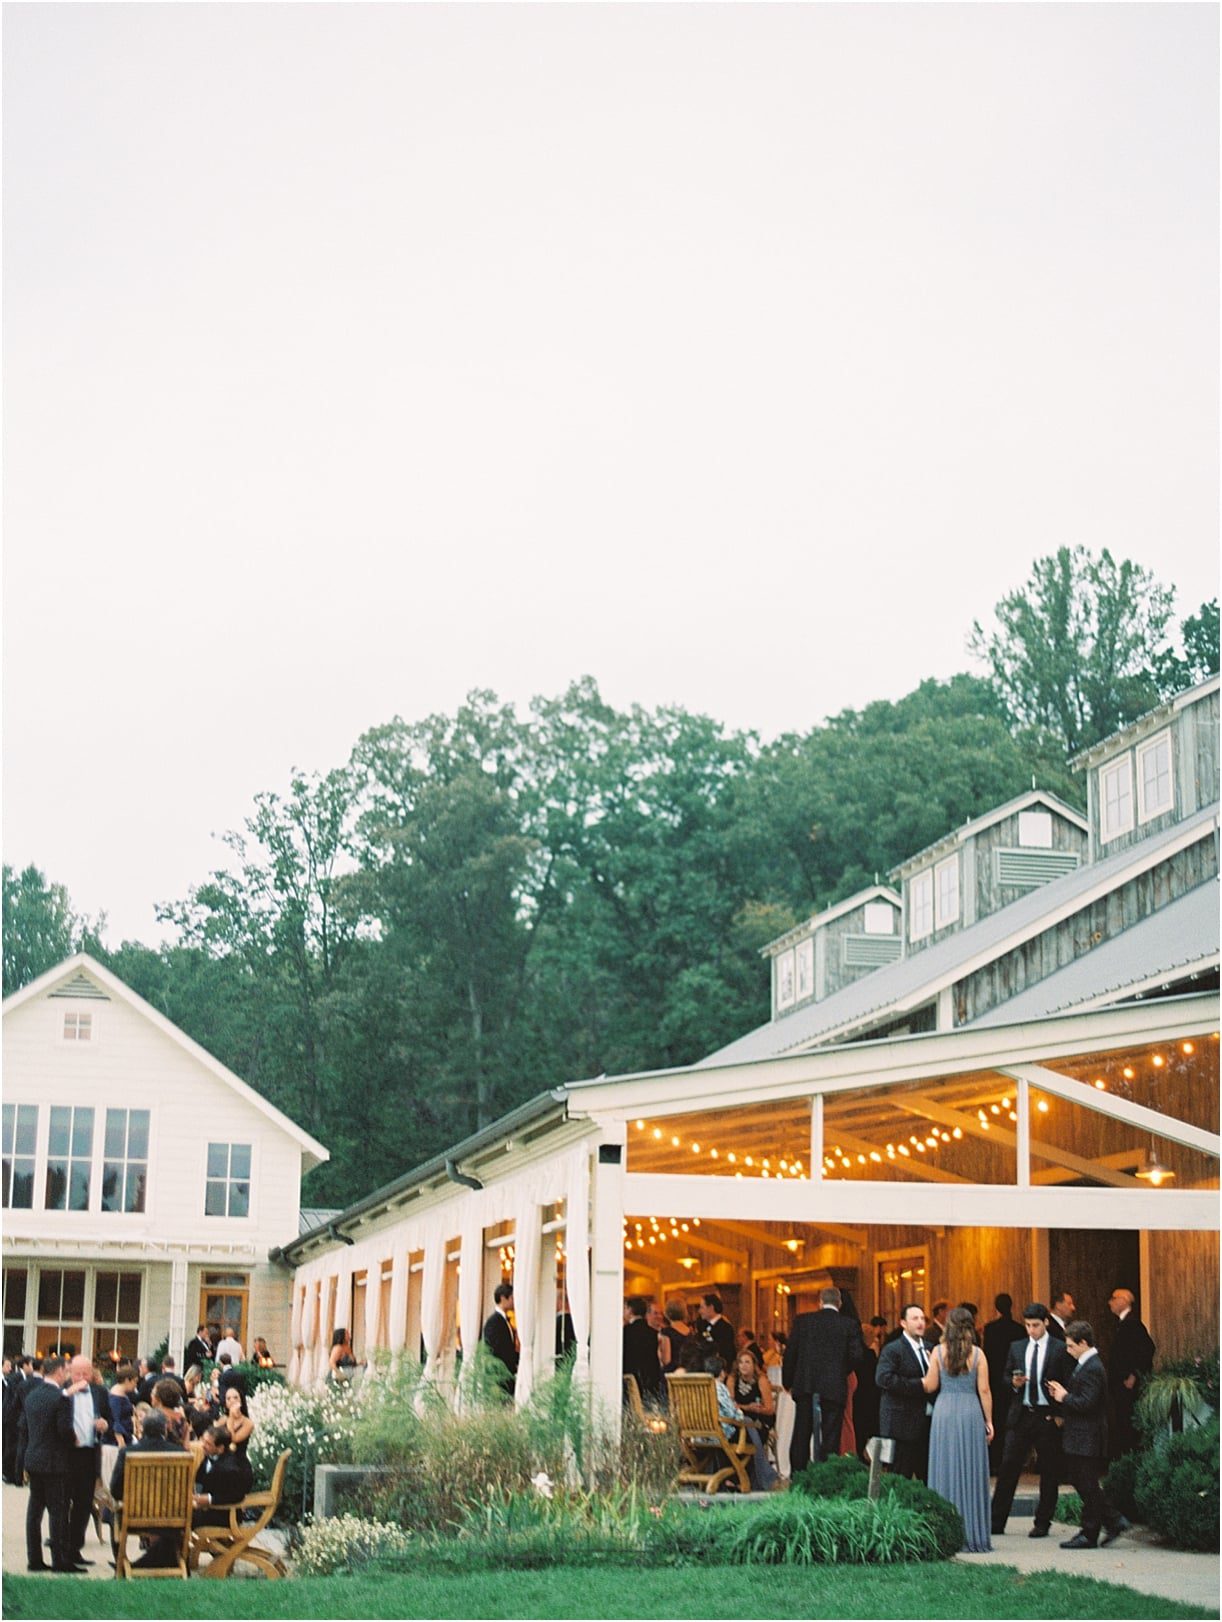 Gorgeous Pippin Hill Wedding in Charlottesville Virginia Mountains | Hill City Bride Virginia Weddings Blog